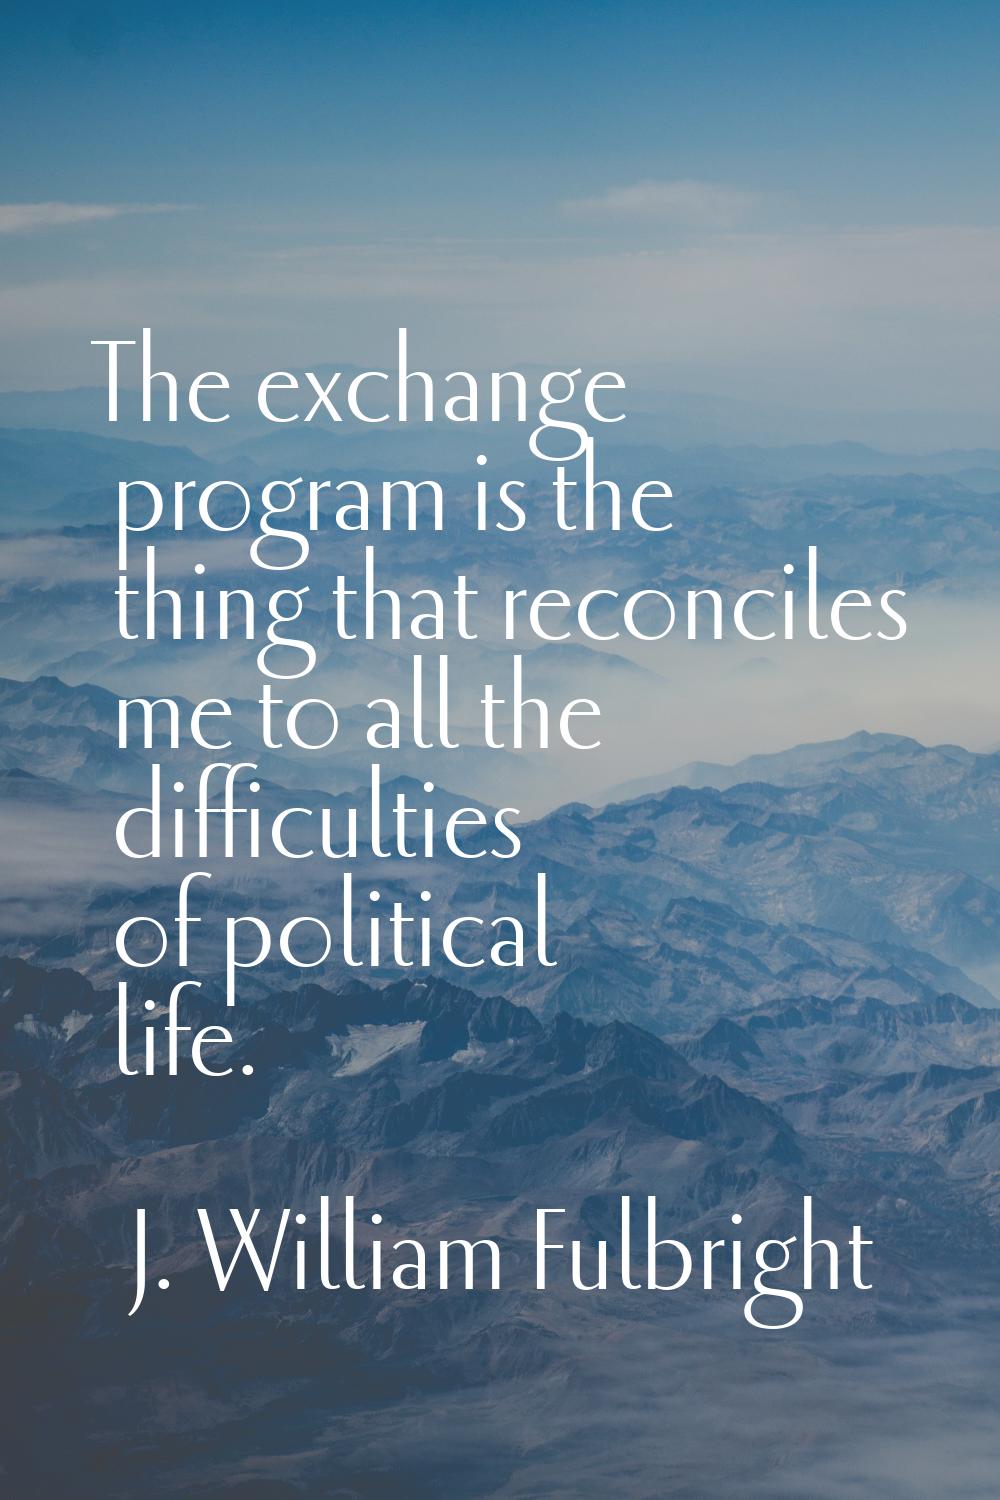 The exchange program is the thing that reconciles me to all the difficulties of political life.